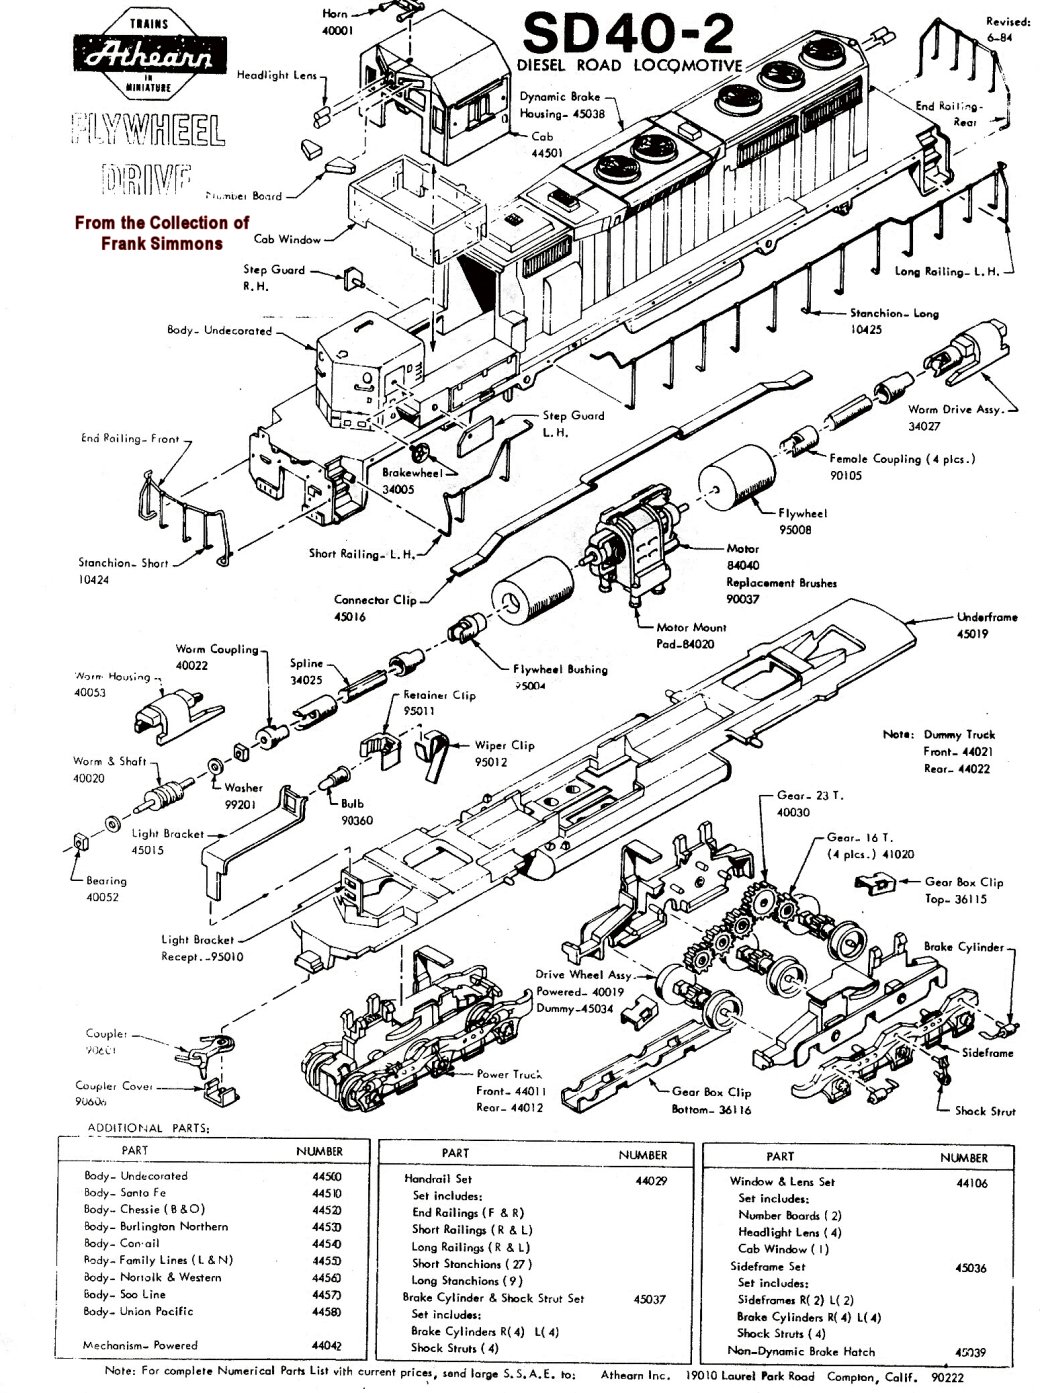 www.hoseeker.net. is a good place for diagrams of quite a few manufacturer&...